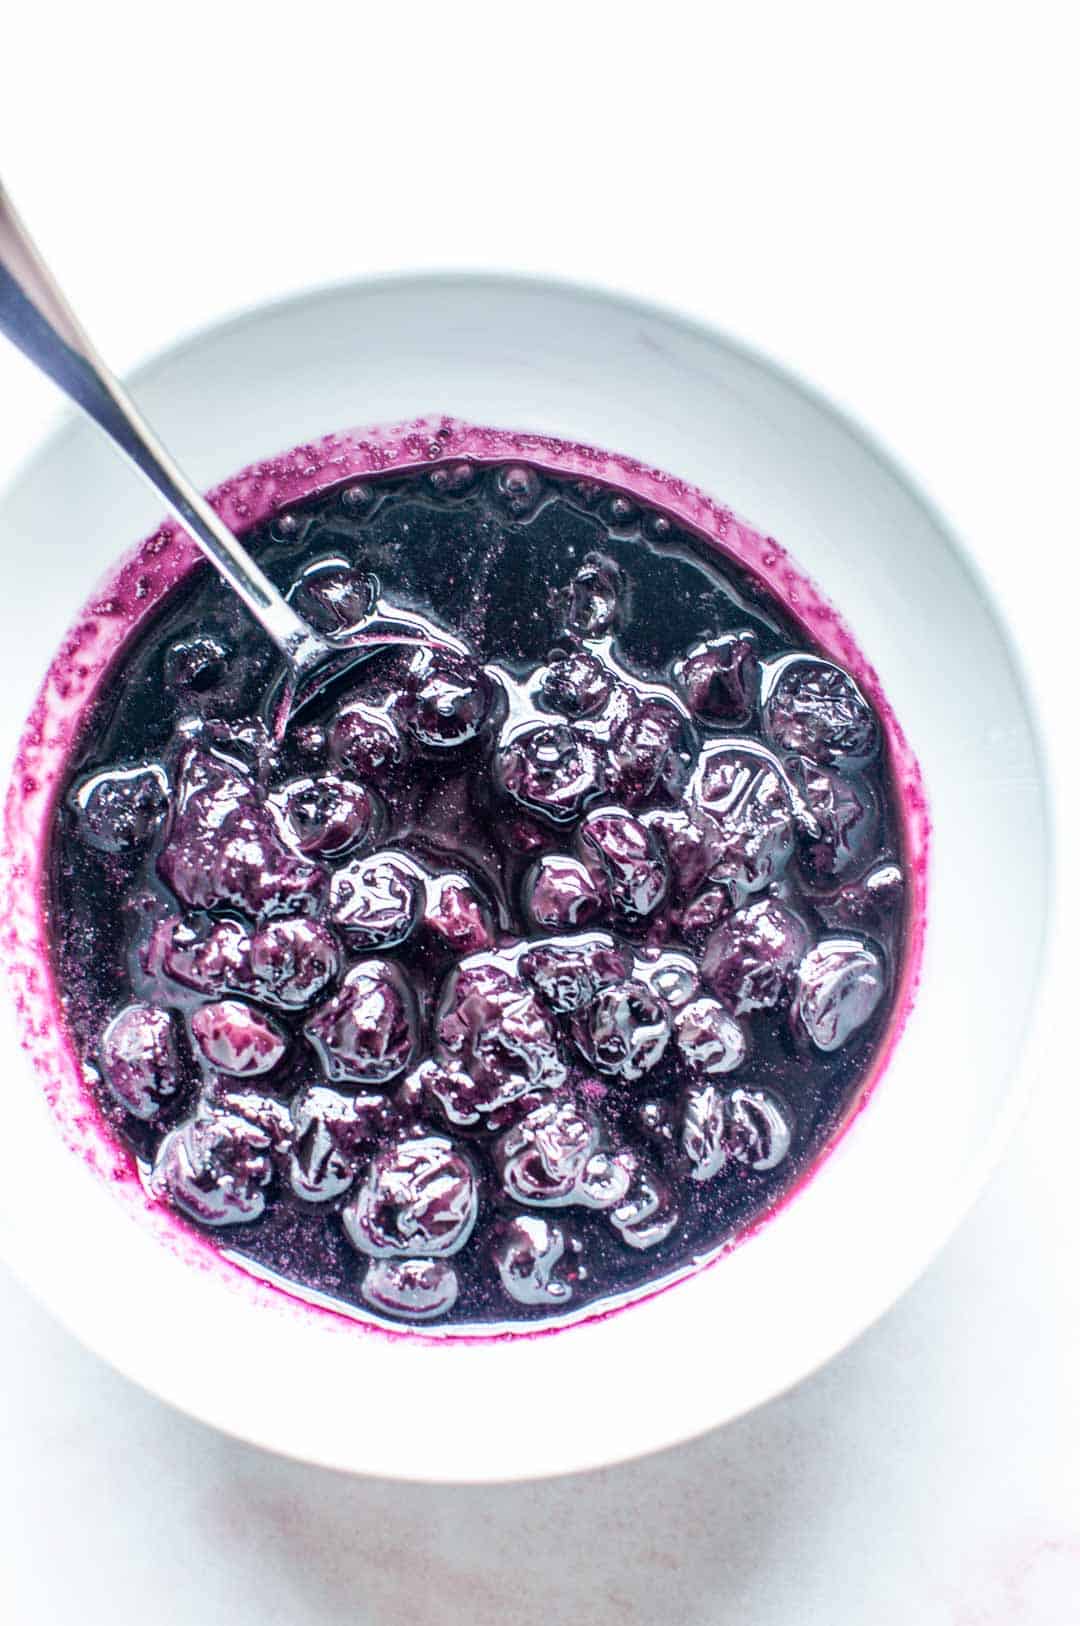 blueberry compote in a bowl